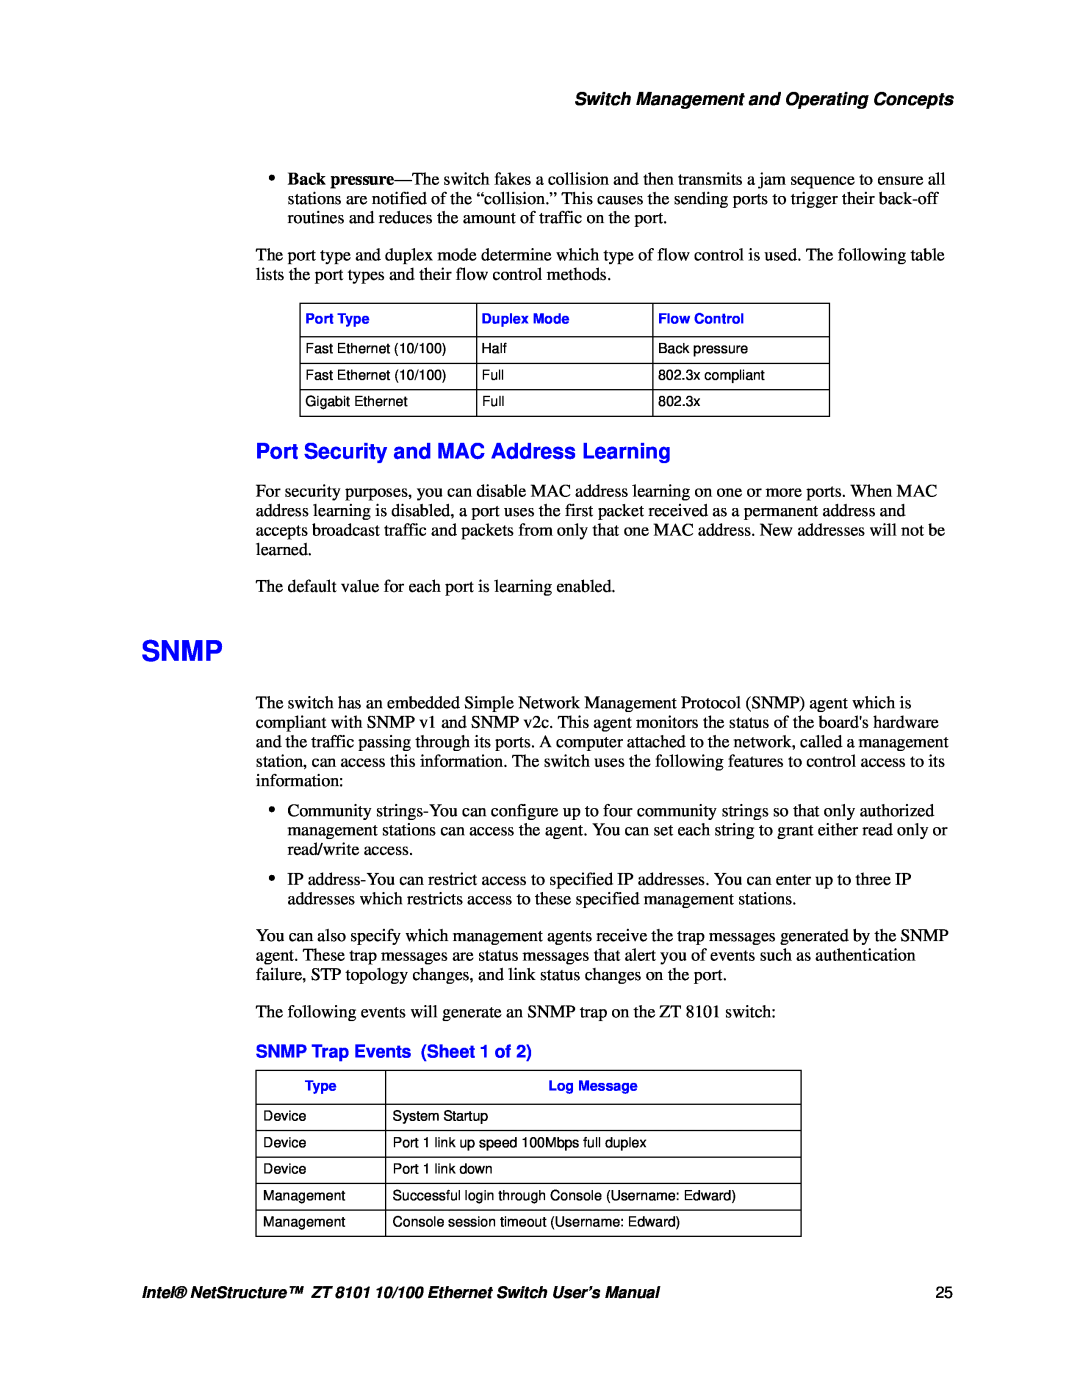 Intel ZT 8101 10/100 user manual Snmp, Port Security and MAC Address Learning, SNMP Trap Events Sheet 1 of 